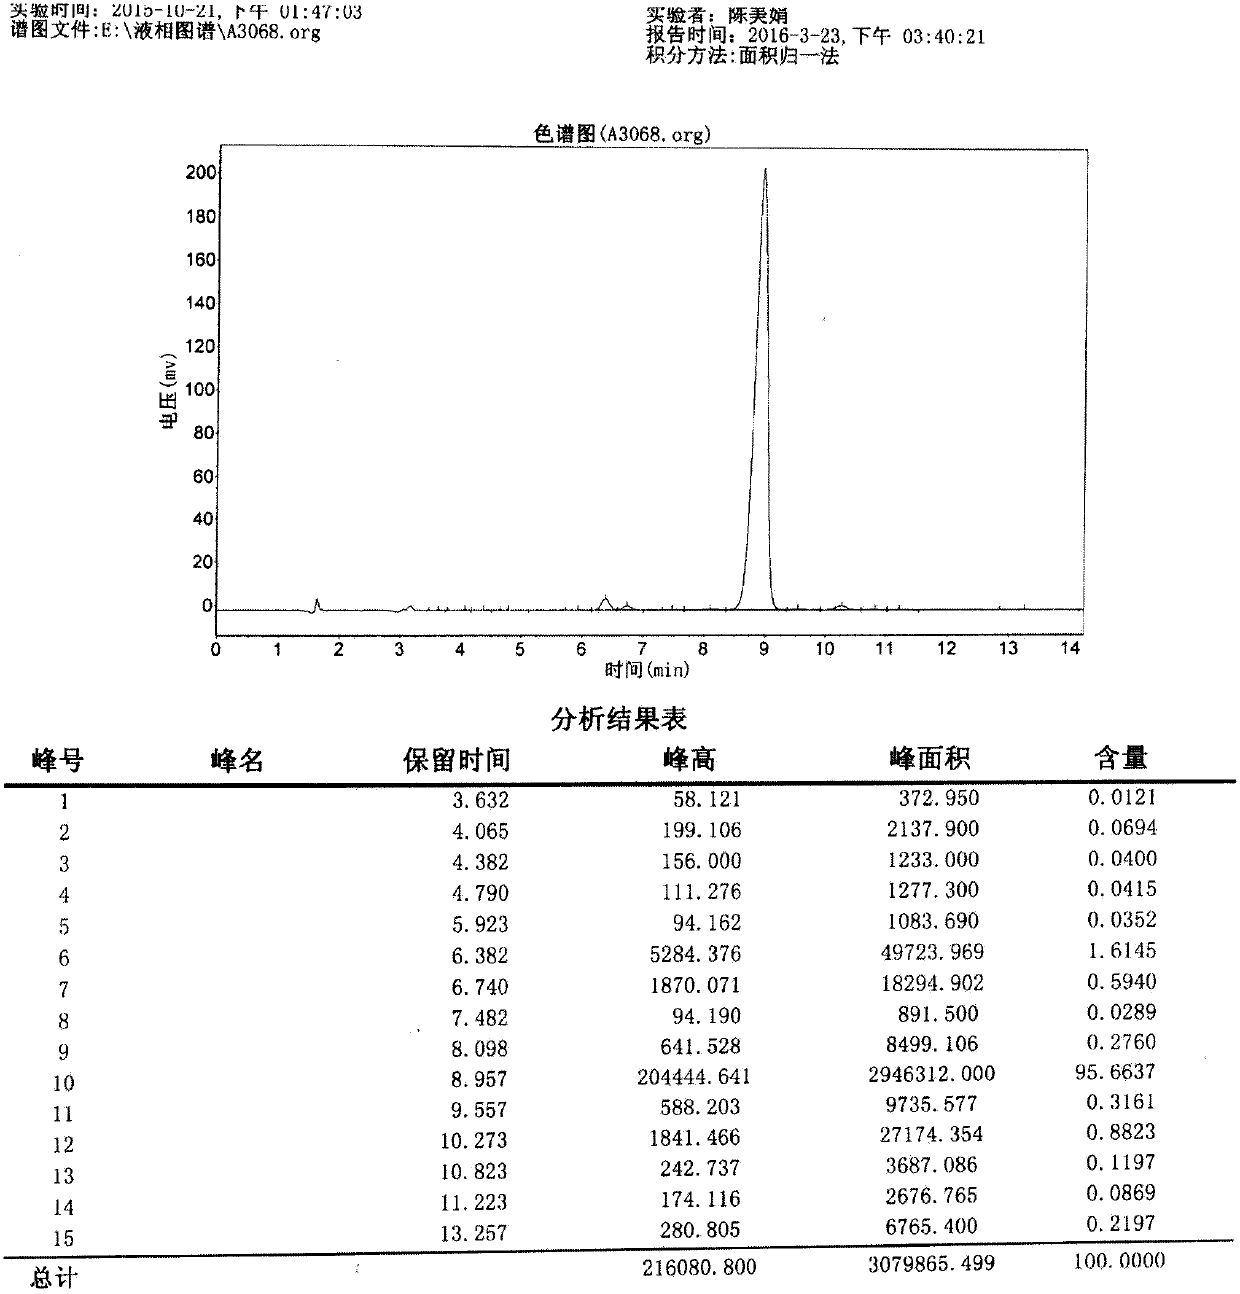 Separation and purification method for rebaudioside C